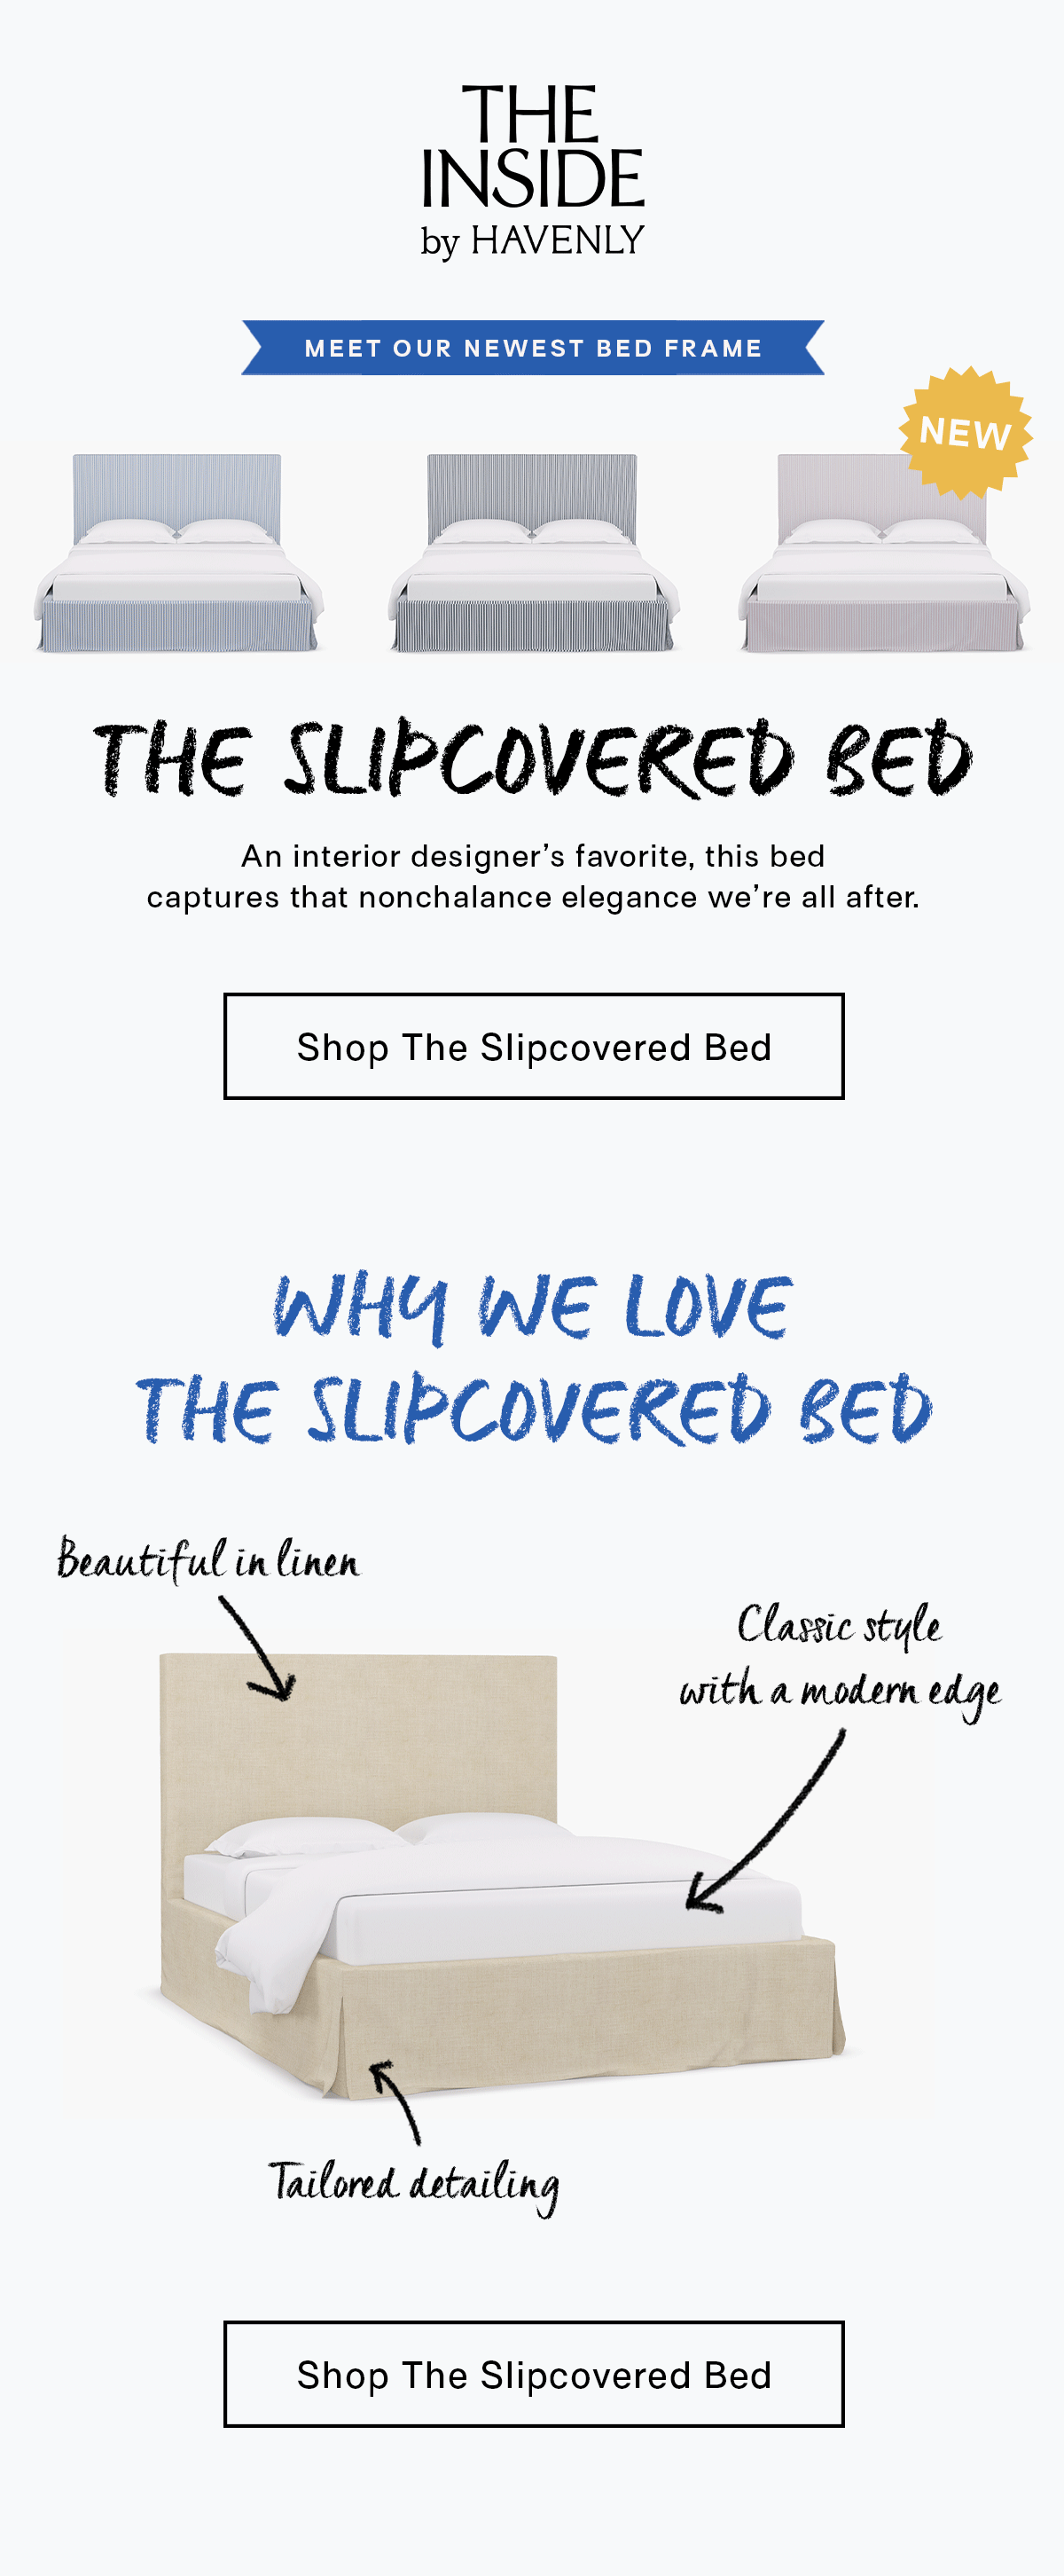 The Slipcovered Bed